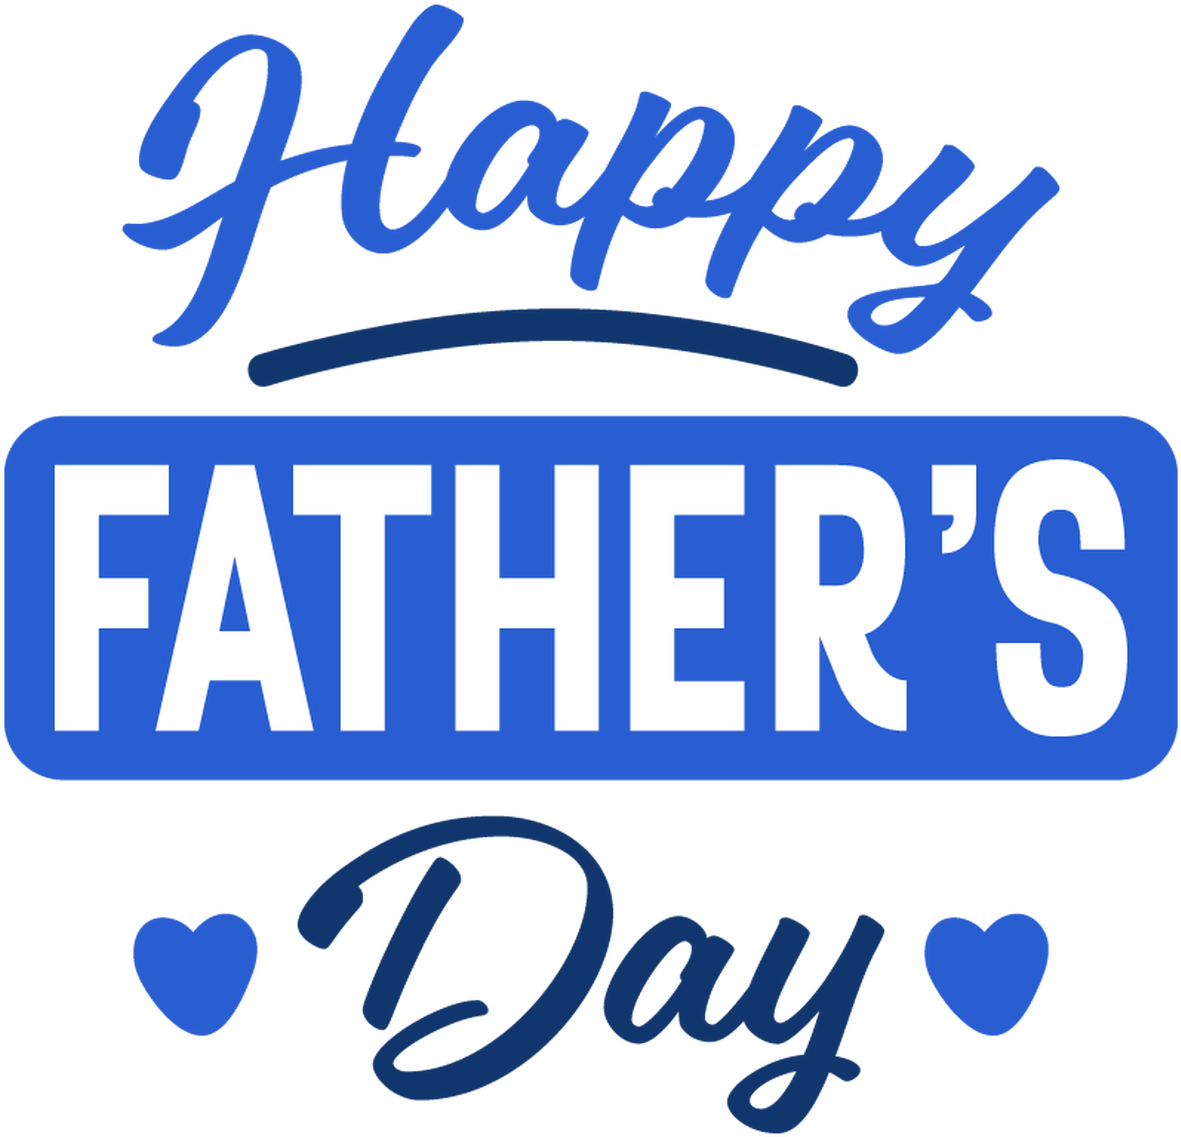 Happy Fathers Day Blue Text Graphic